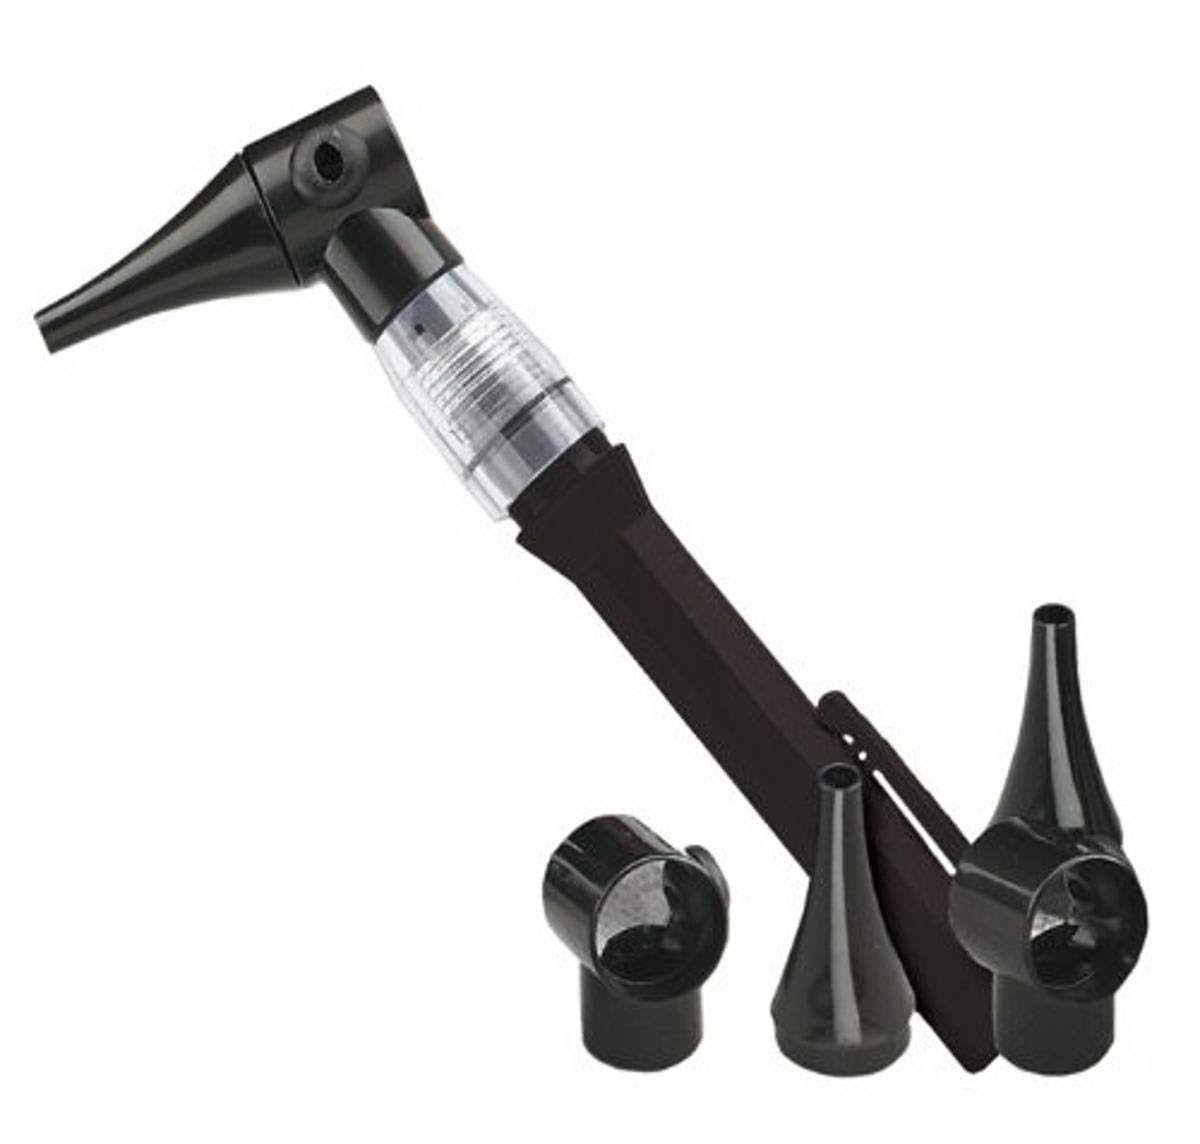 Prestige Medical Xenon Pocket Otoscope | Health Care | 30 Day Money Back Guarantee | Free Shipping On All Orders | Delivery Guaranteed